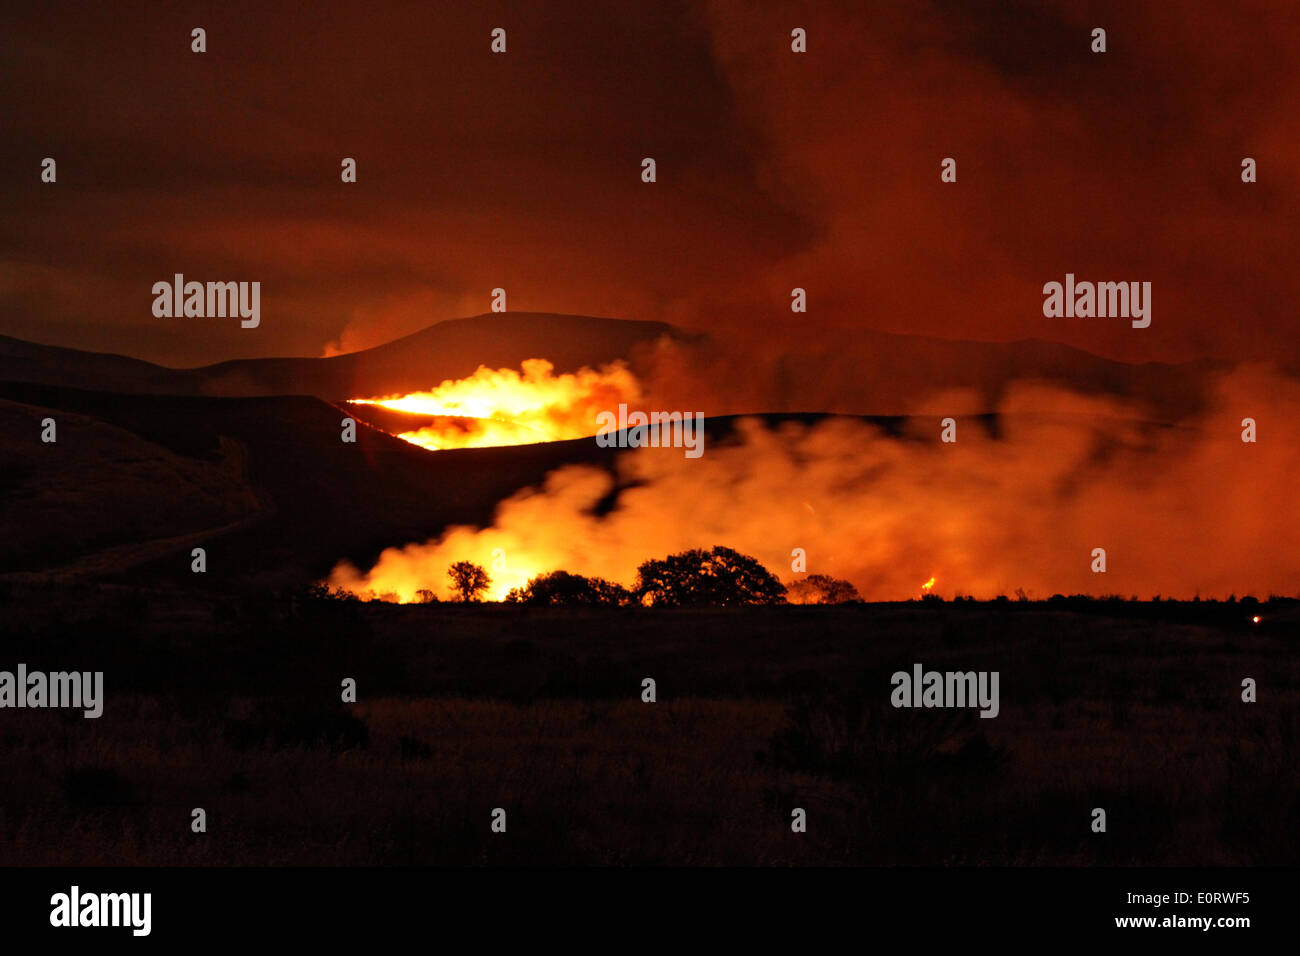 The Las Pulgas and Tomahawk wildfire burns at night in the foothills around the Marine Corps base May 15, 2014 in Camp Pendleton, California. Stock Photo